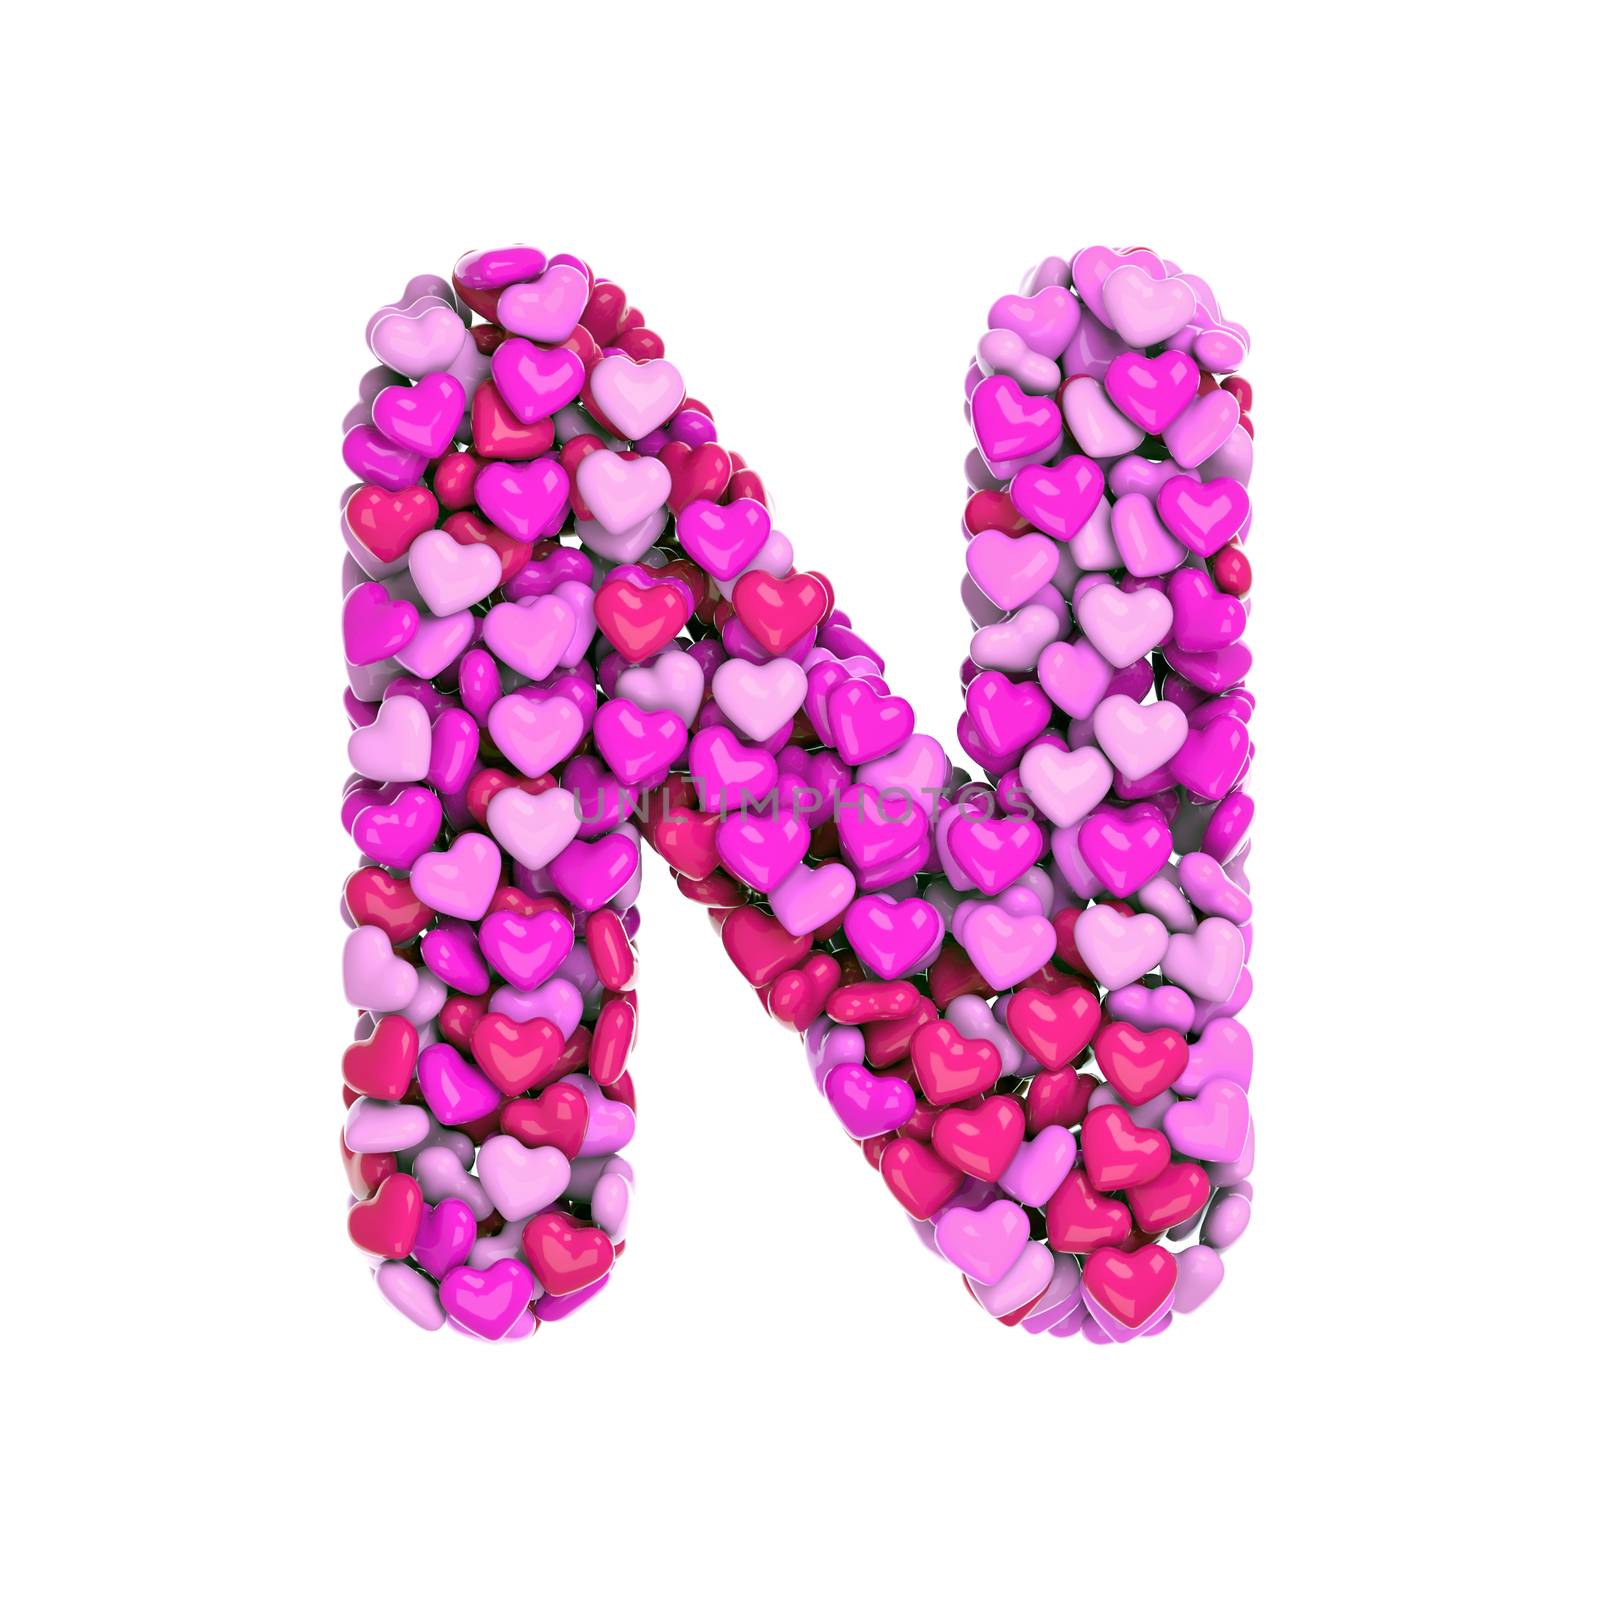 Valentine letter N - Capital 3d pink hearts font - Love, passion or wedding concept by chrisroll